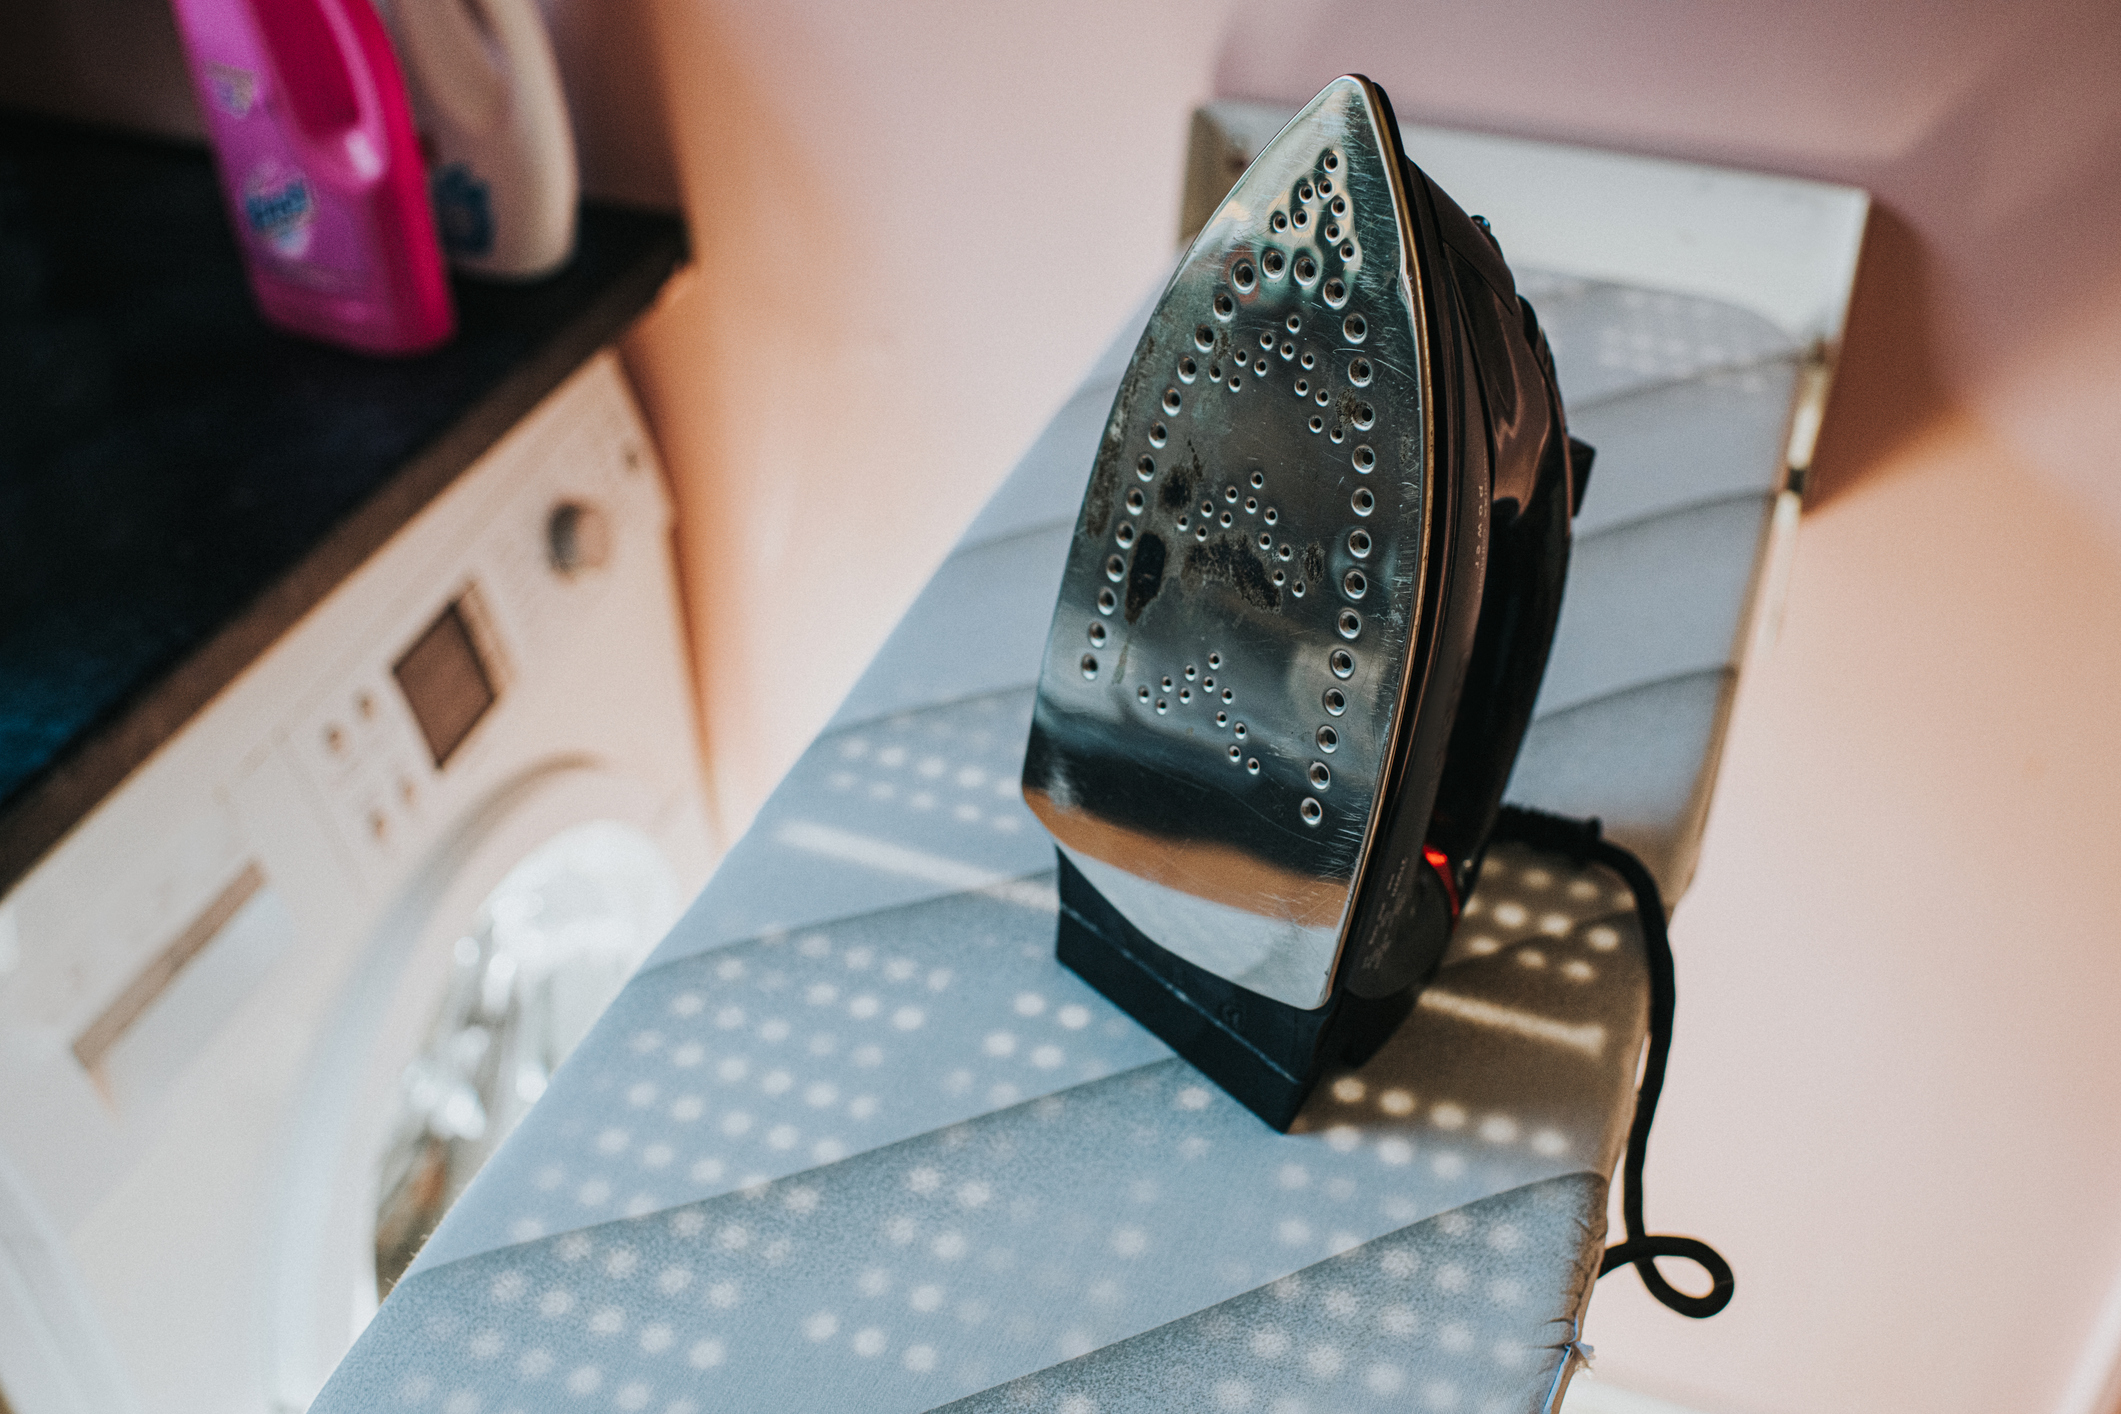 An iron left face down on an ironing board, creating a potential fire hazard